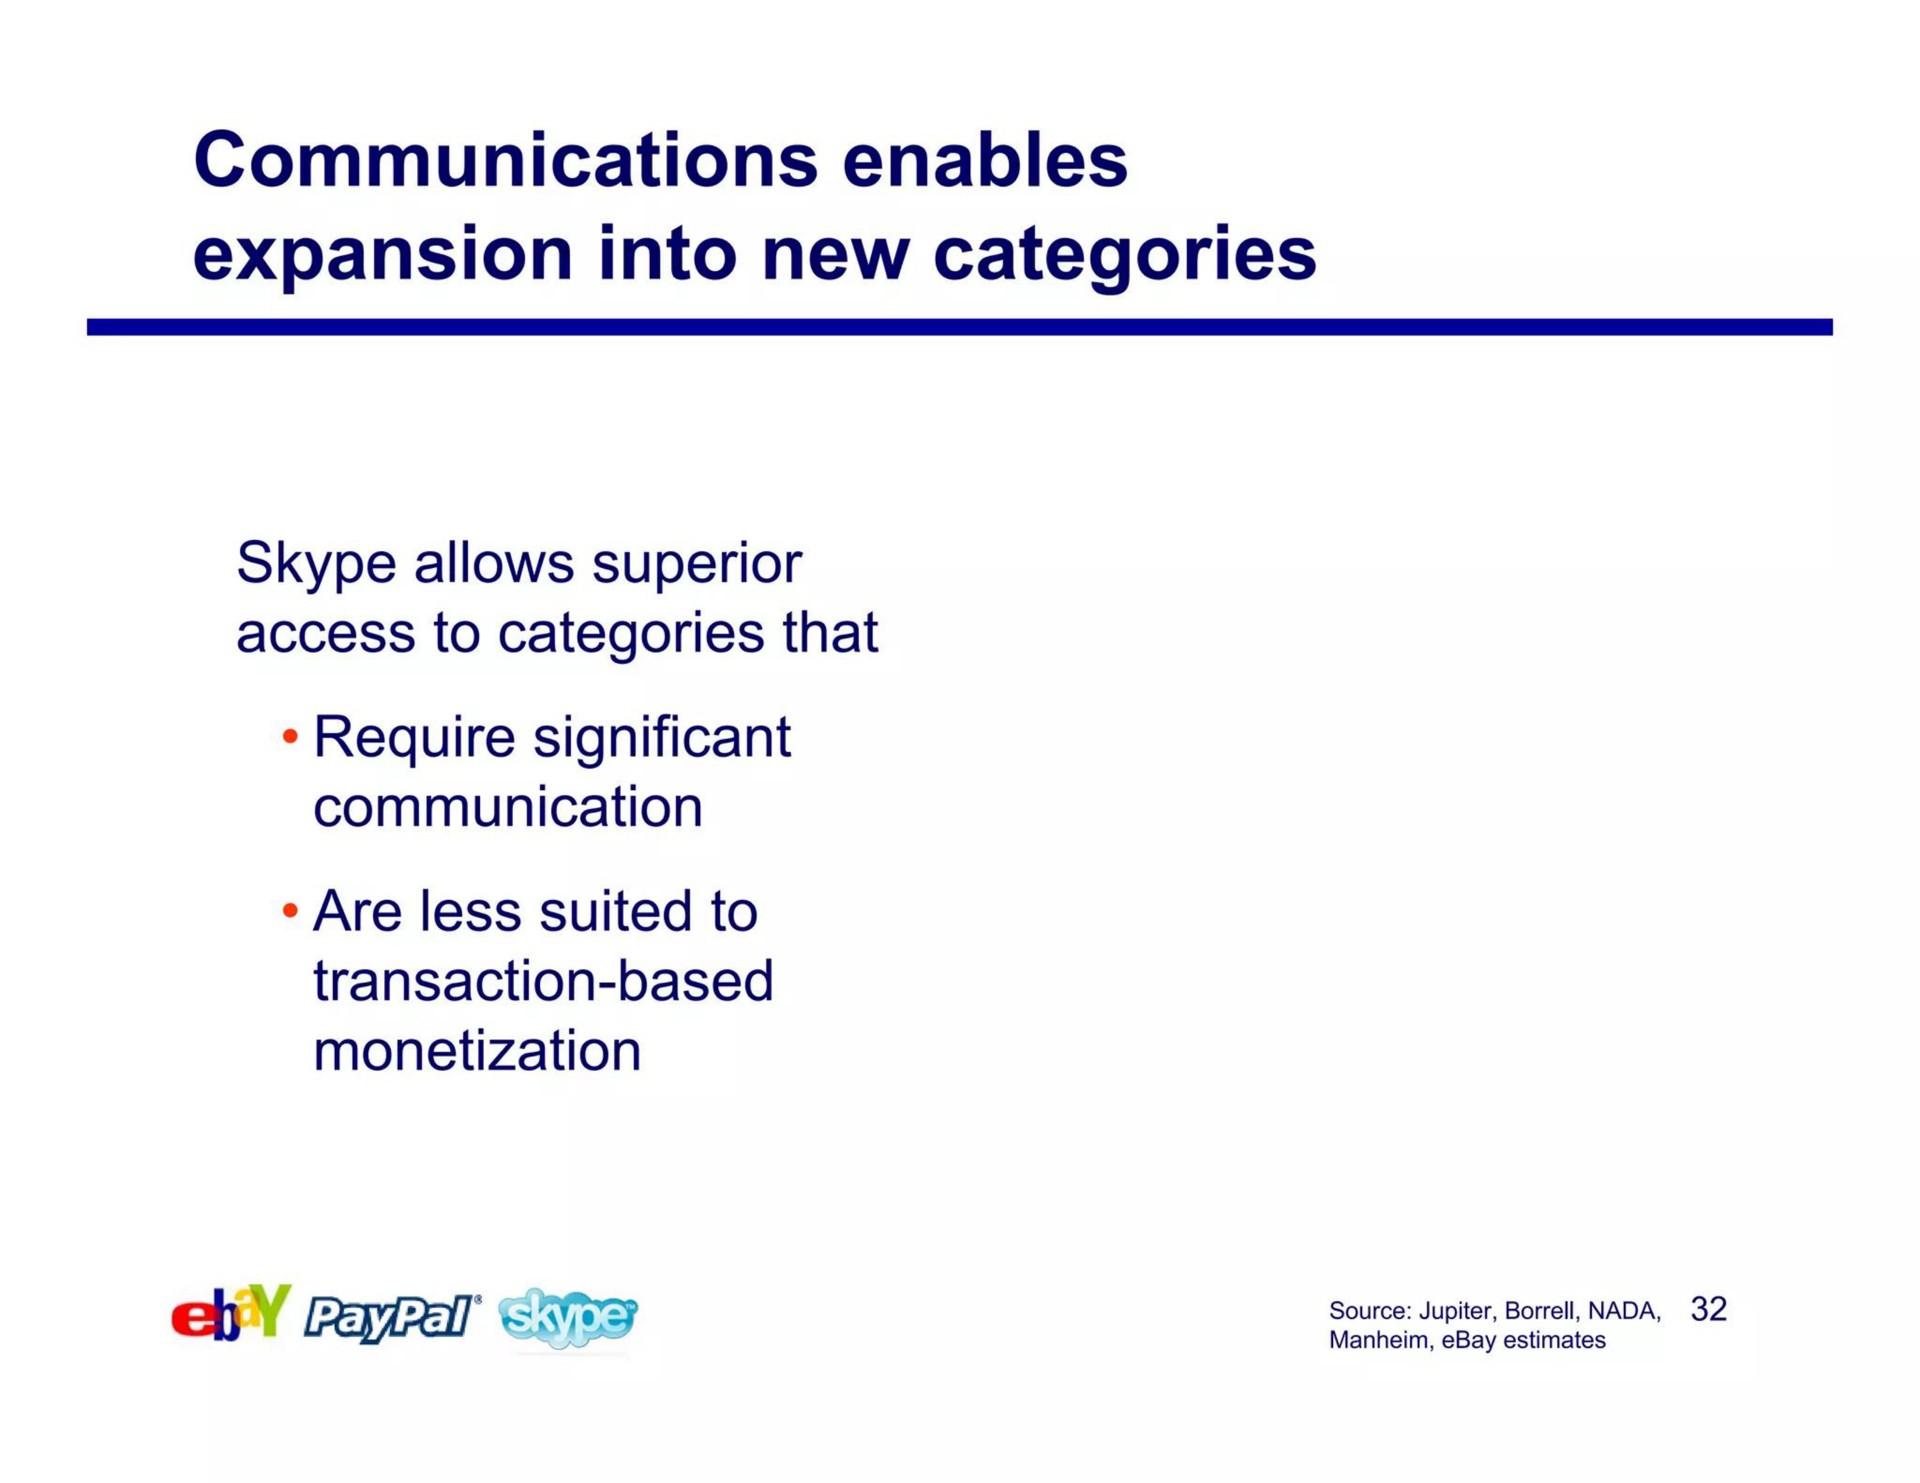 communications enables expansion into new categories | eBay